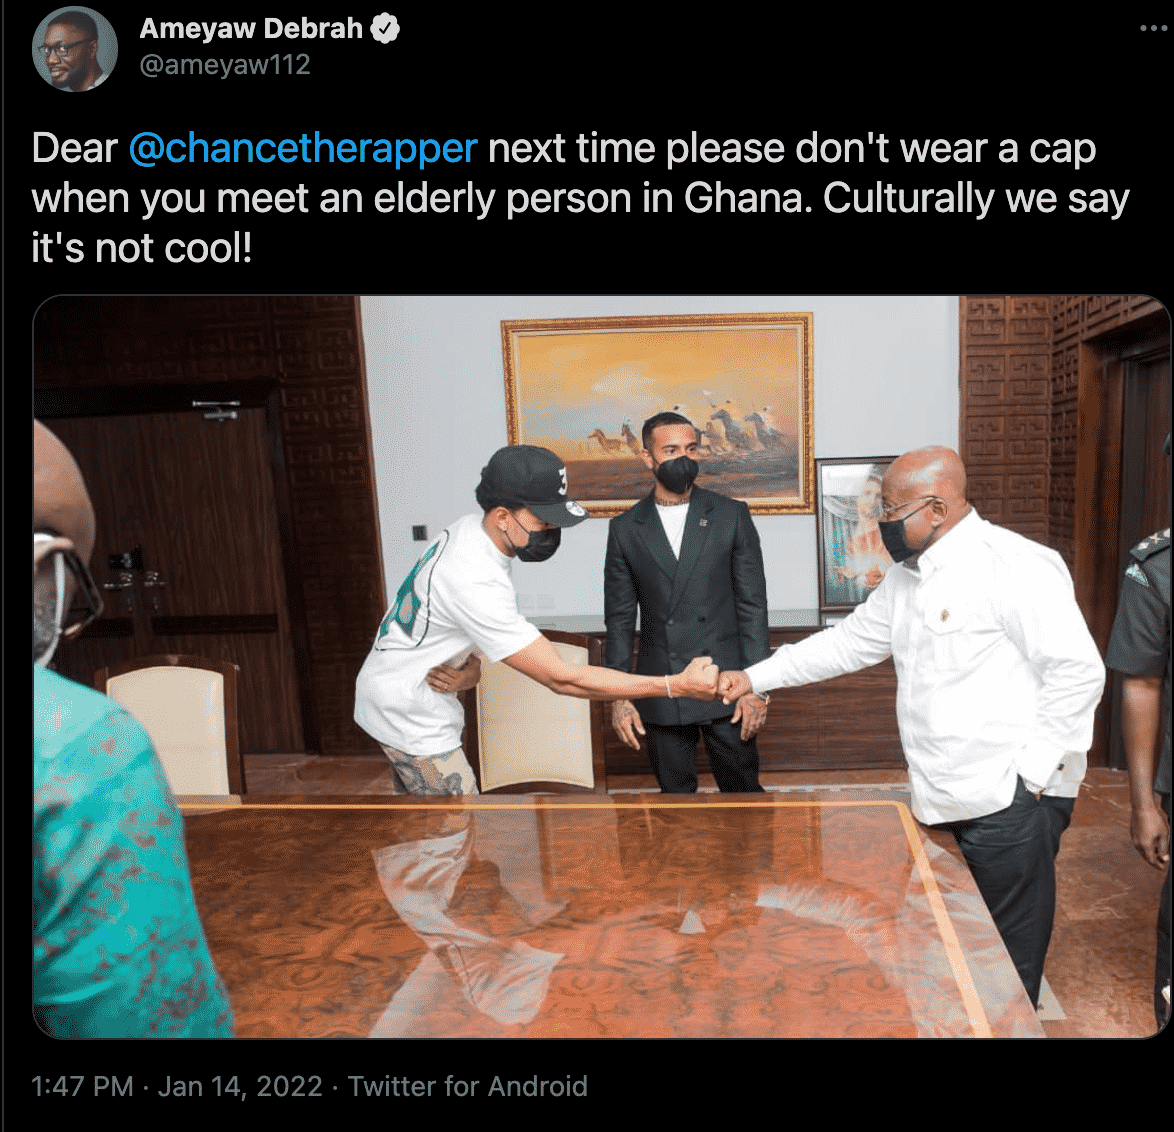 In Ghana, it's culturally unacceptable to greet an elderly while in cap – Ameyaw Debrah schools Chance The Rapper